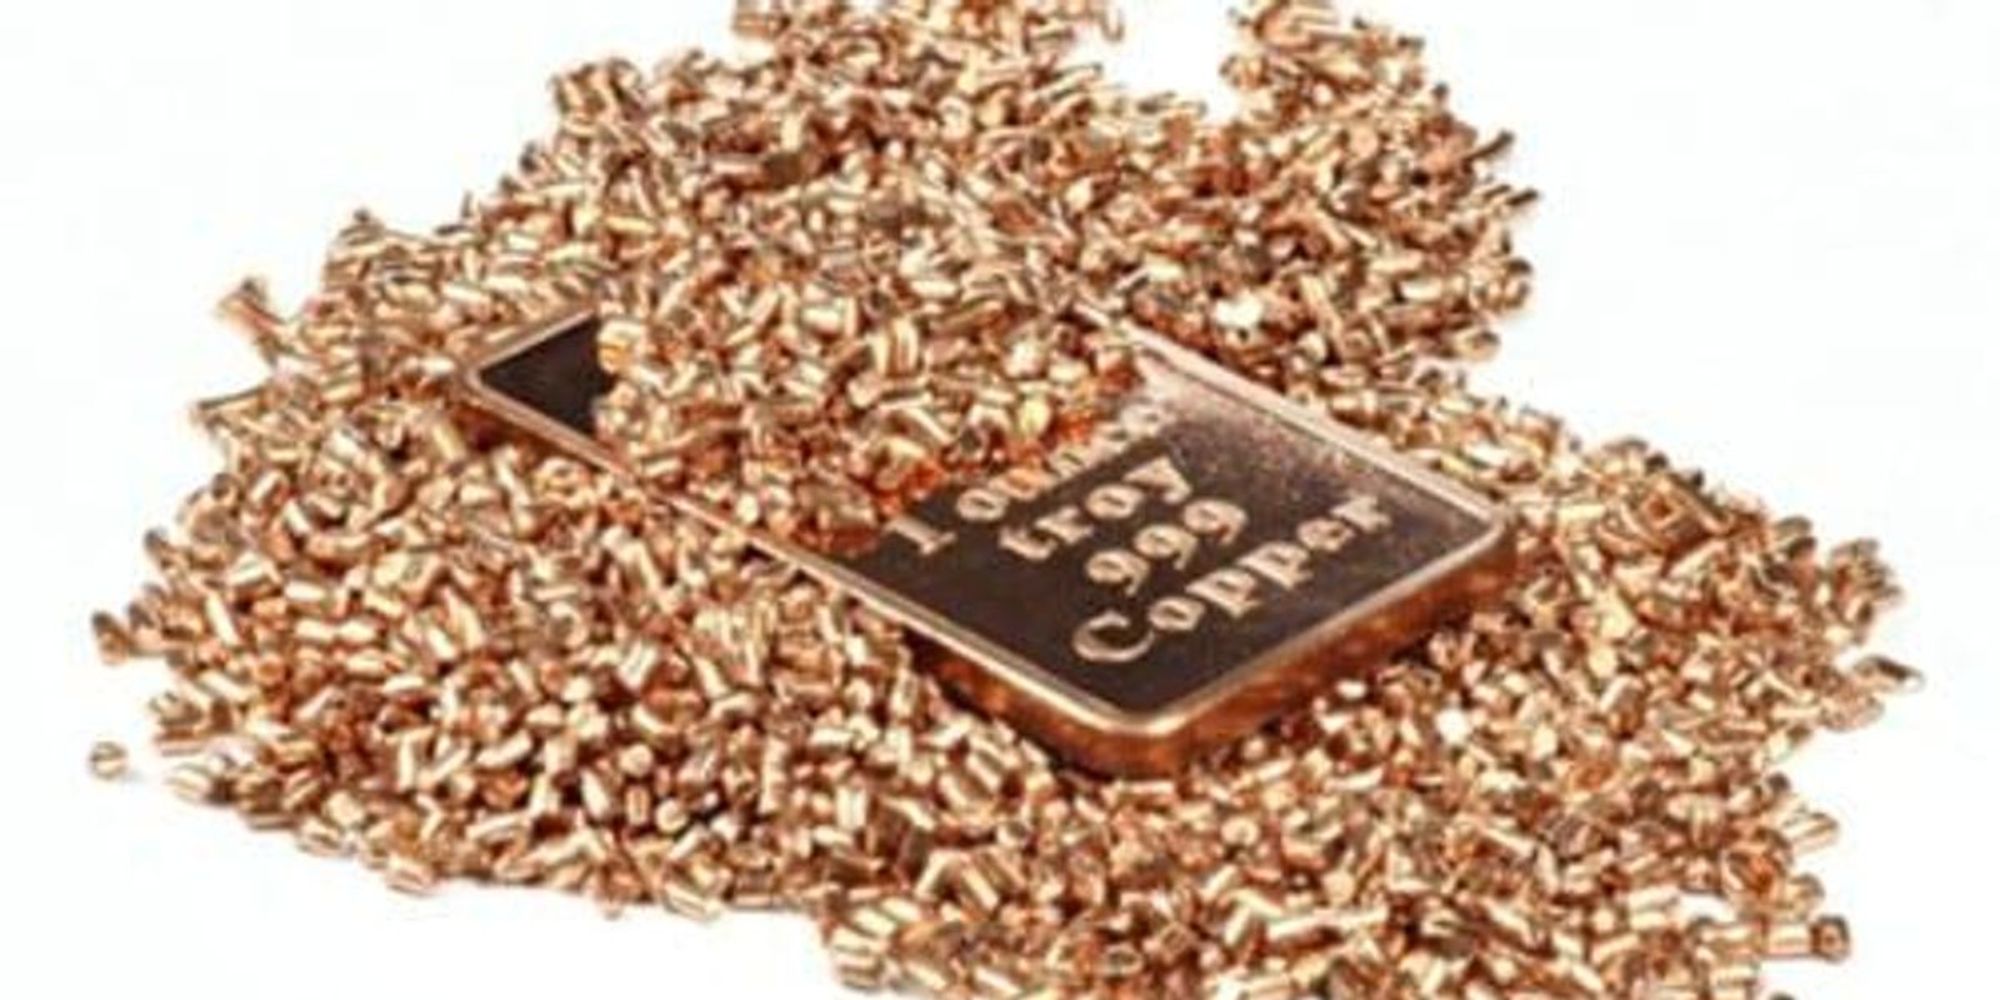 Copper Prices Up, Stocks Follow